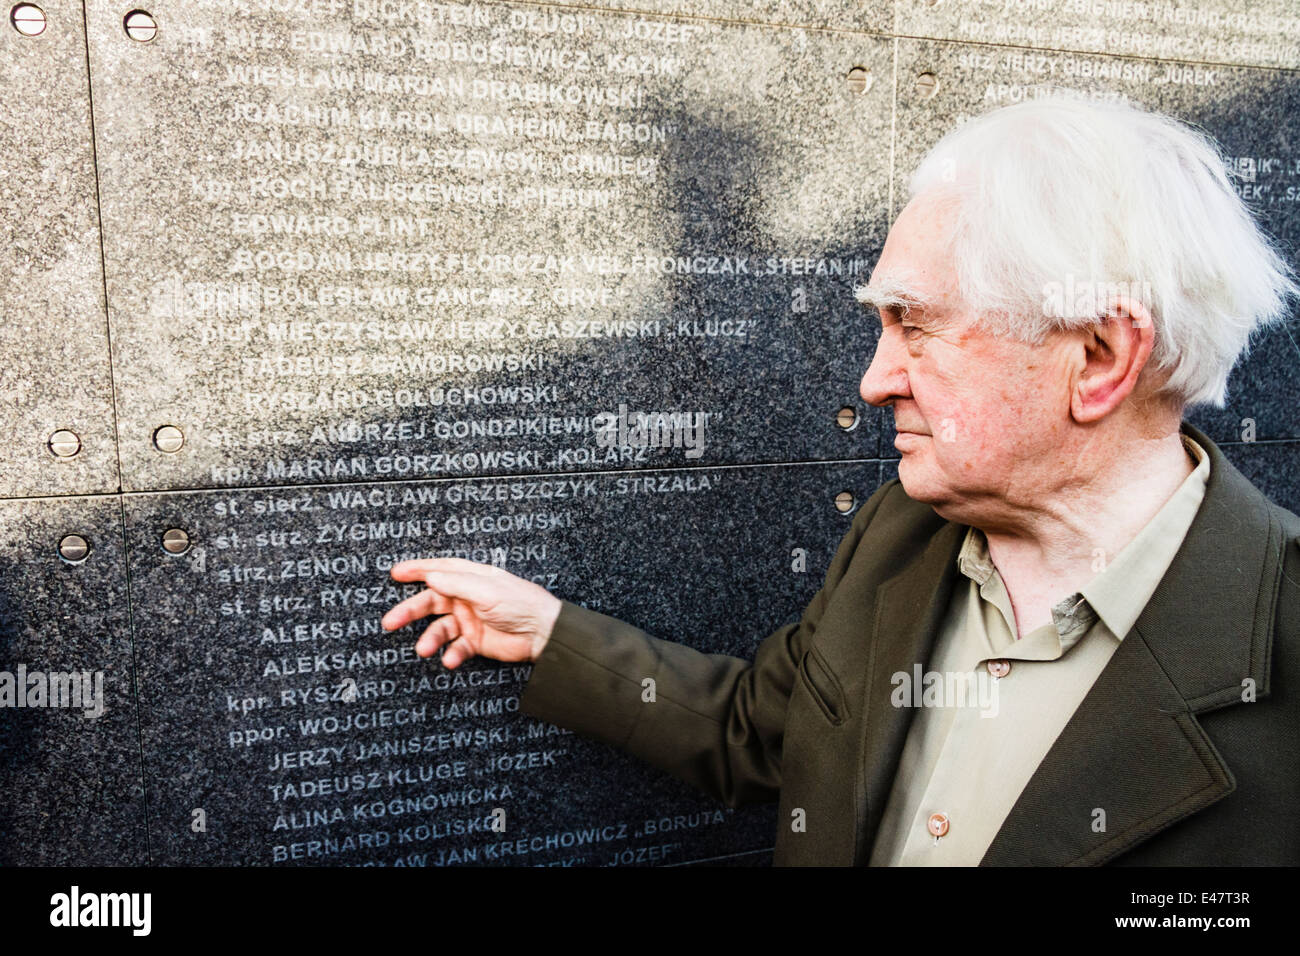 WWII veteran Zygmunt Gwiazdowski pointing to his brother Zenon name, deceased at a concentration camp. Warsaw uprising museum Stock Photo